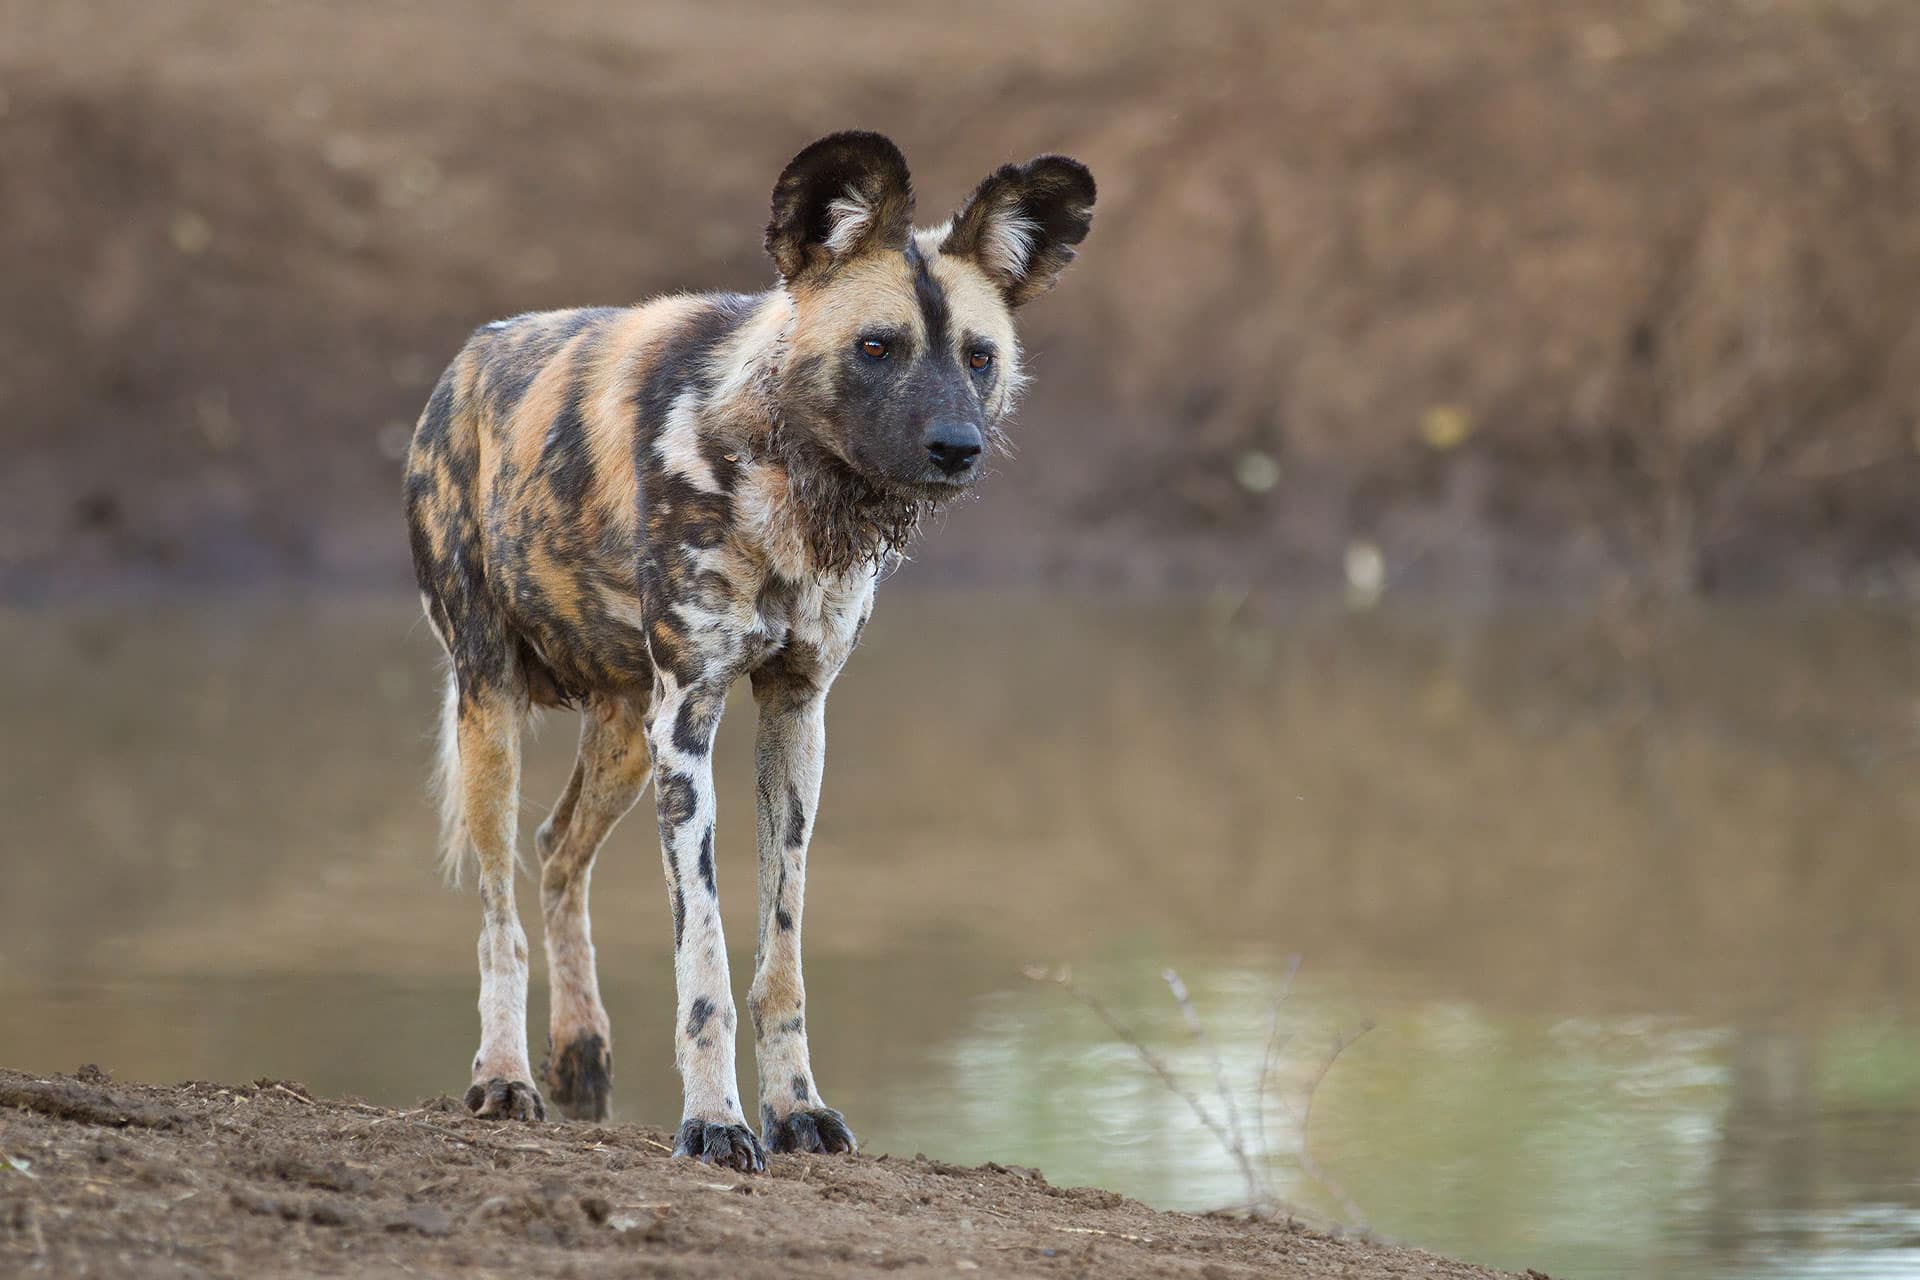 A wild dog at a waterhole spotted on a safari in Africa in Kruger